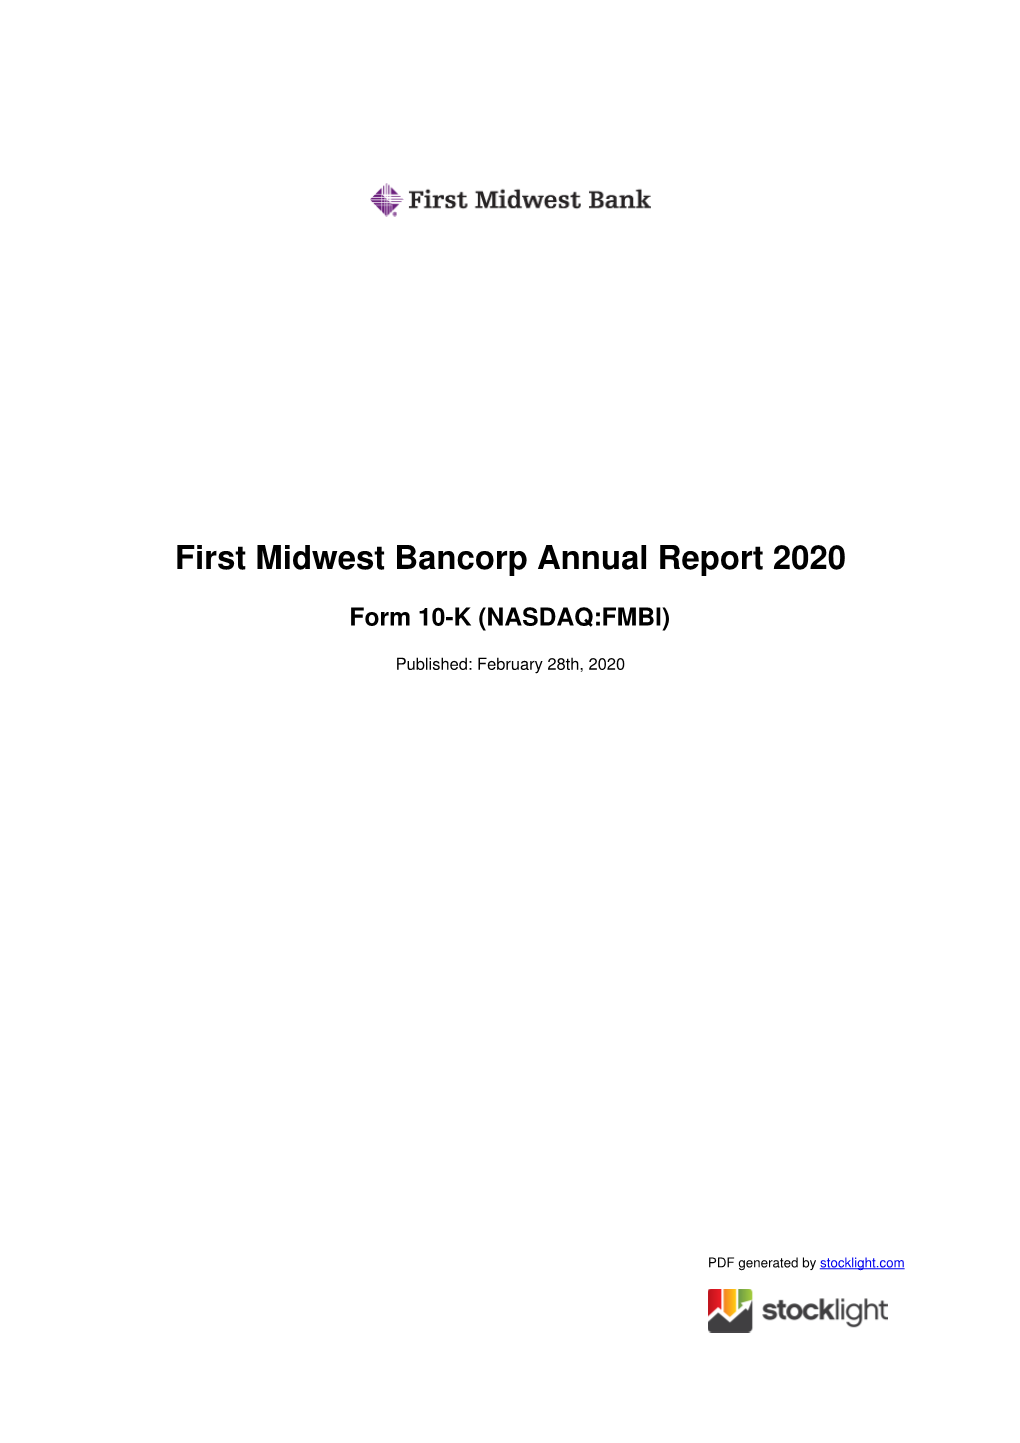 First Midwest Bancorp Annual Report 2020